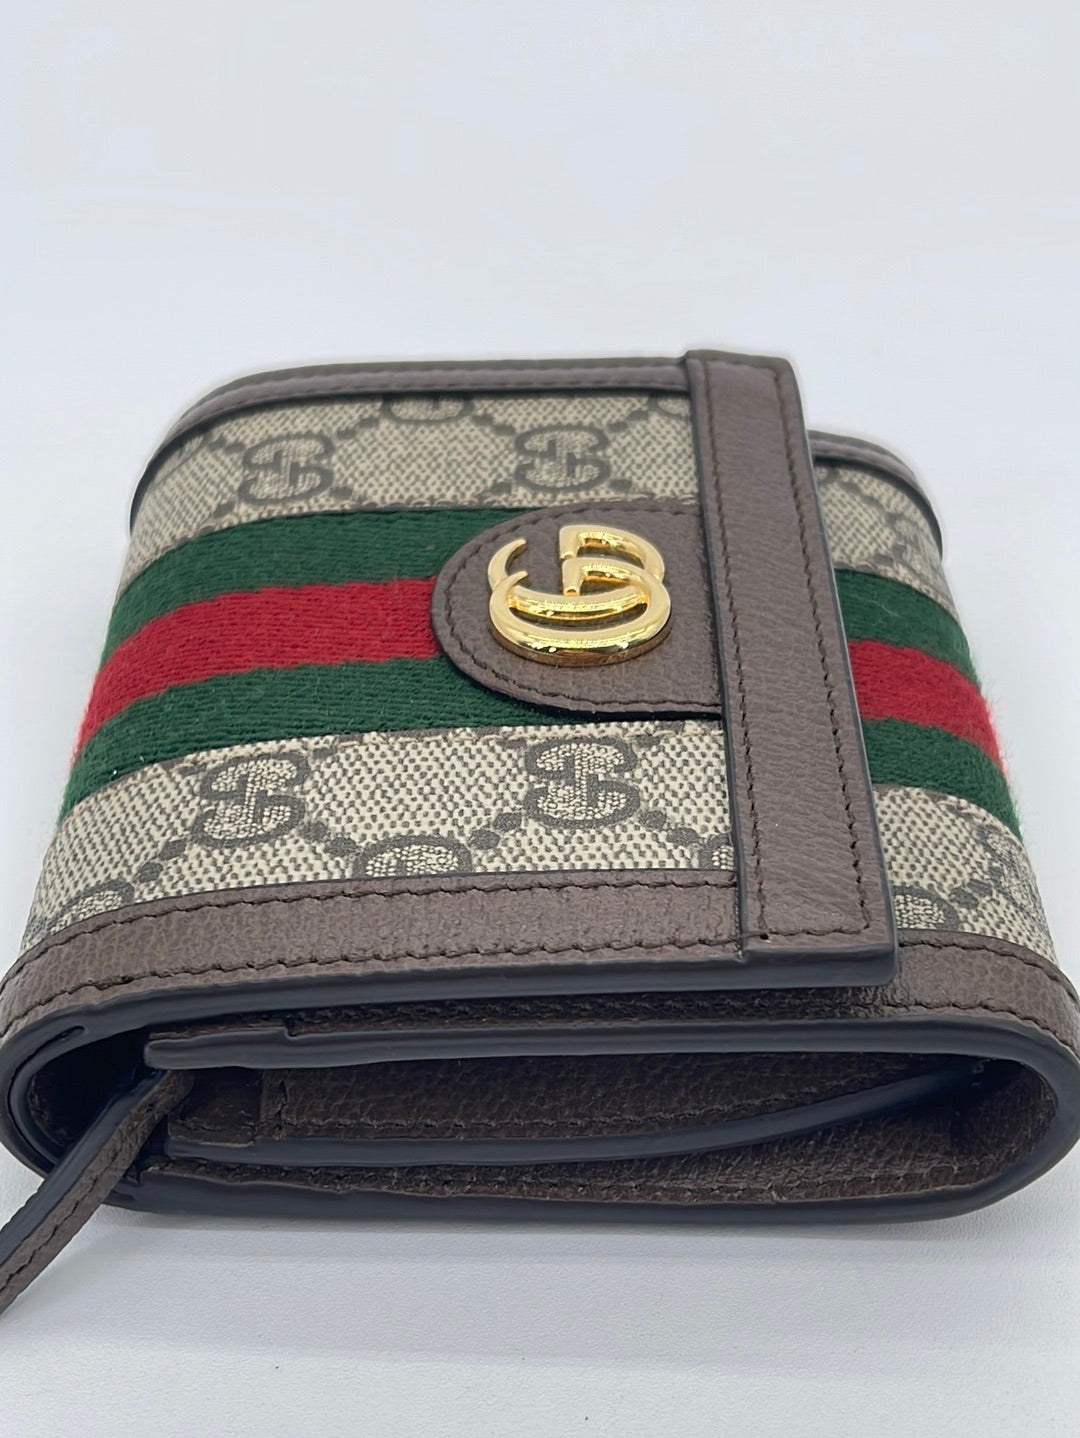 Gucci Pink Guccissima Cat Card Case Wallet Aged Gold Hardware Available For  Immediate Sale At Sotheby's